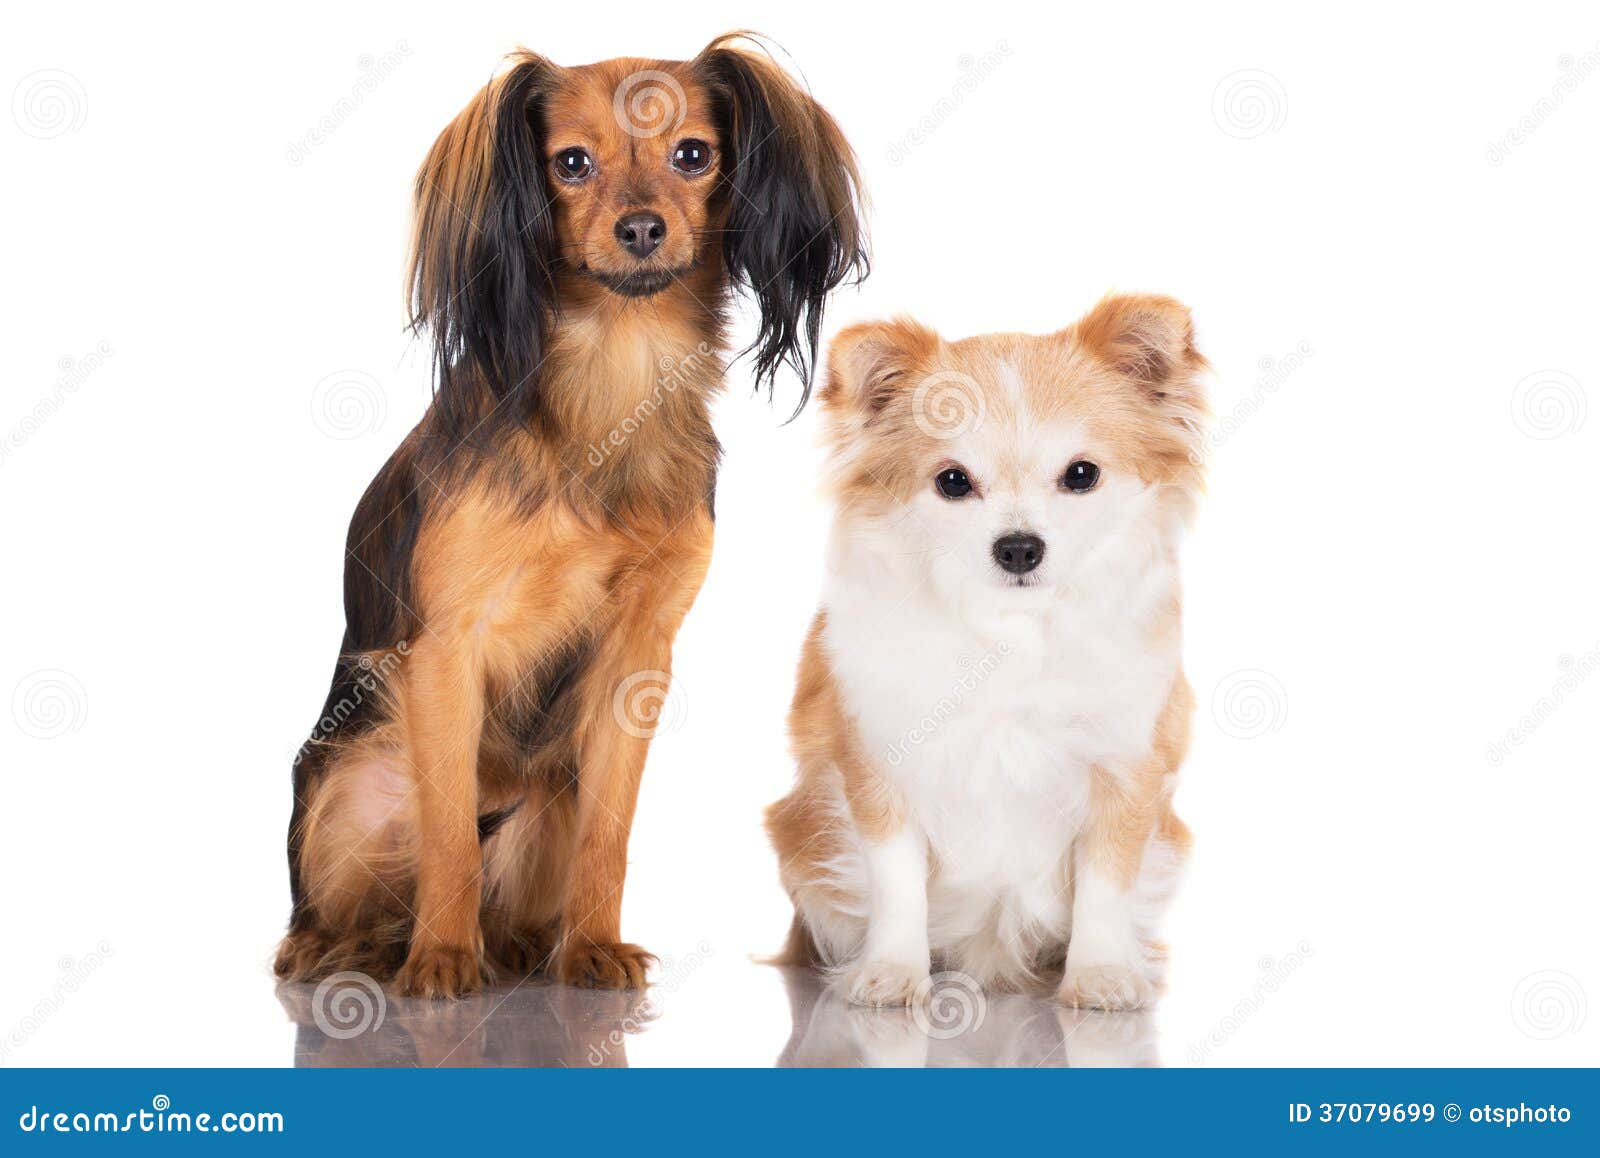 Russian Toy Terrier And Chihuahua Dogs Stock Image Image Of Posing Rare 37079699